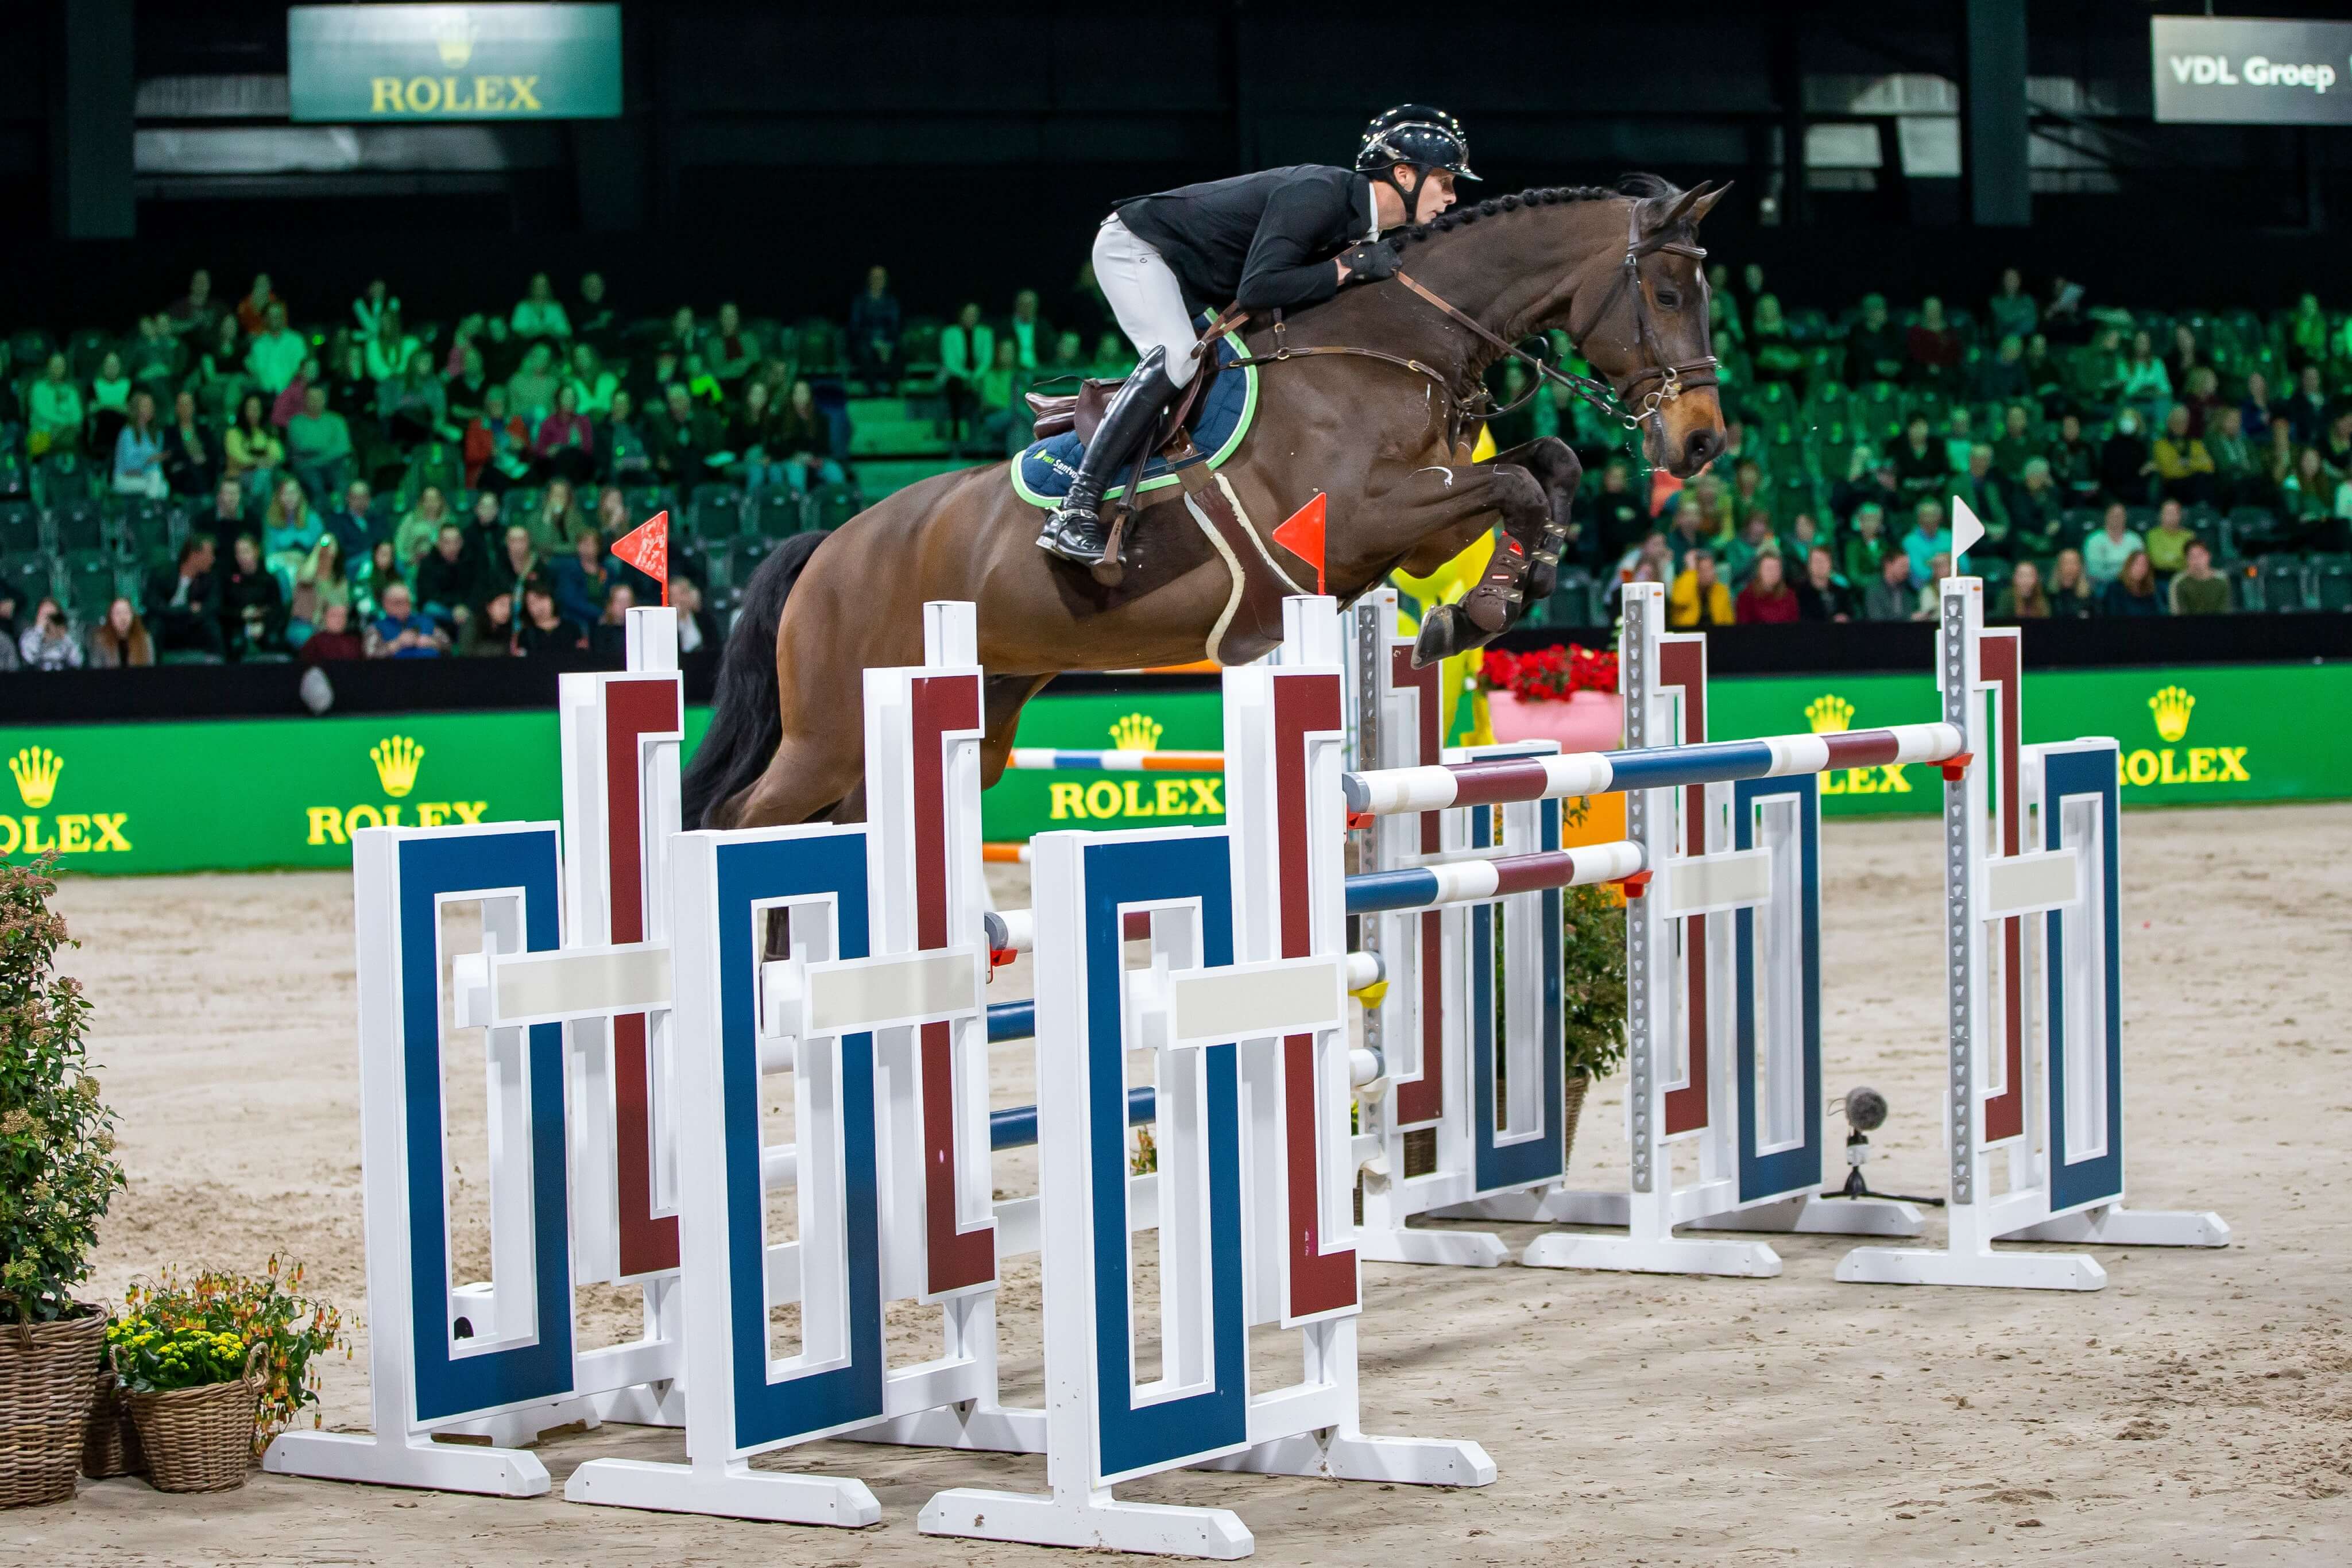 Mans Thijssen shines with gold in 4* evening class Rouen